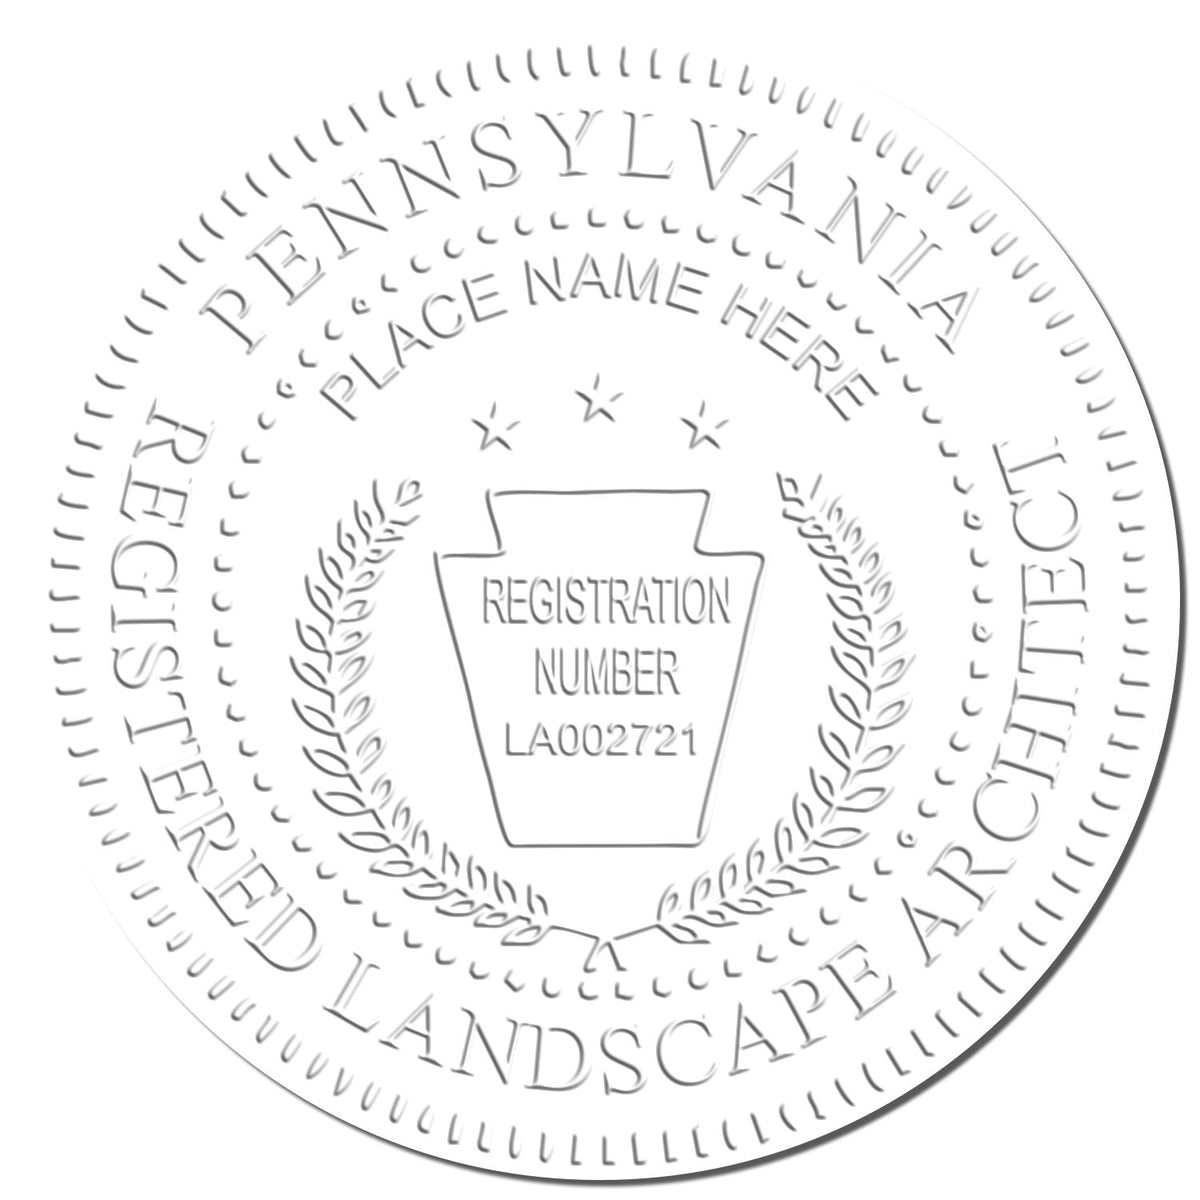 This paper is stamped with a sample imprint of the Hybrid Pennsylvania Landscape Architect Seal, signifying its quality and reliability.